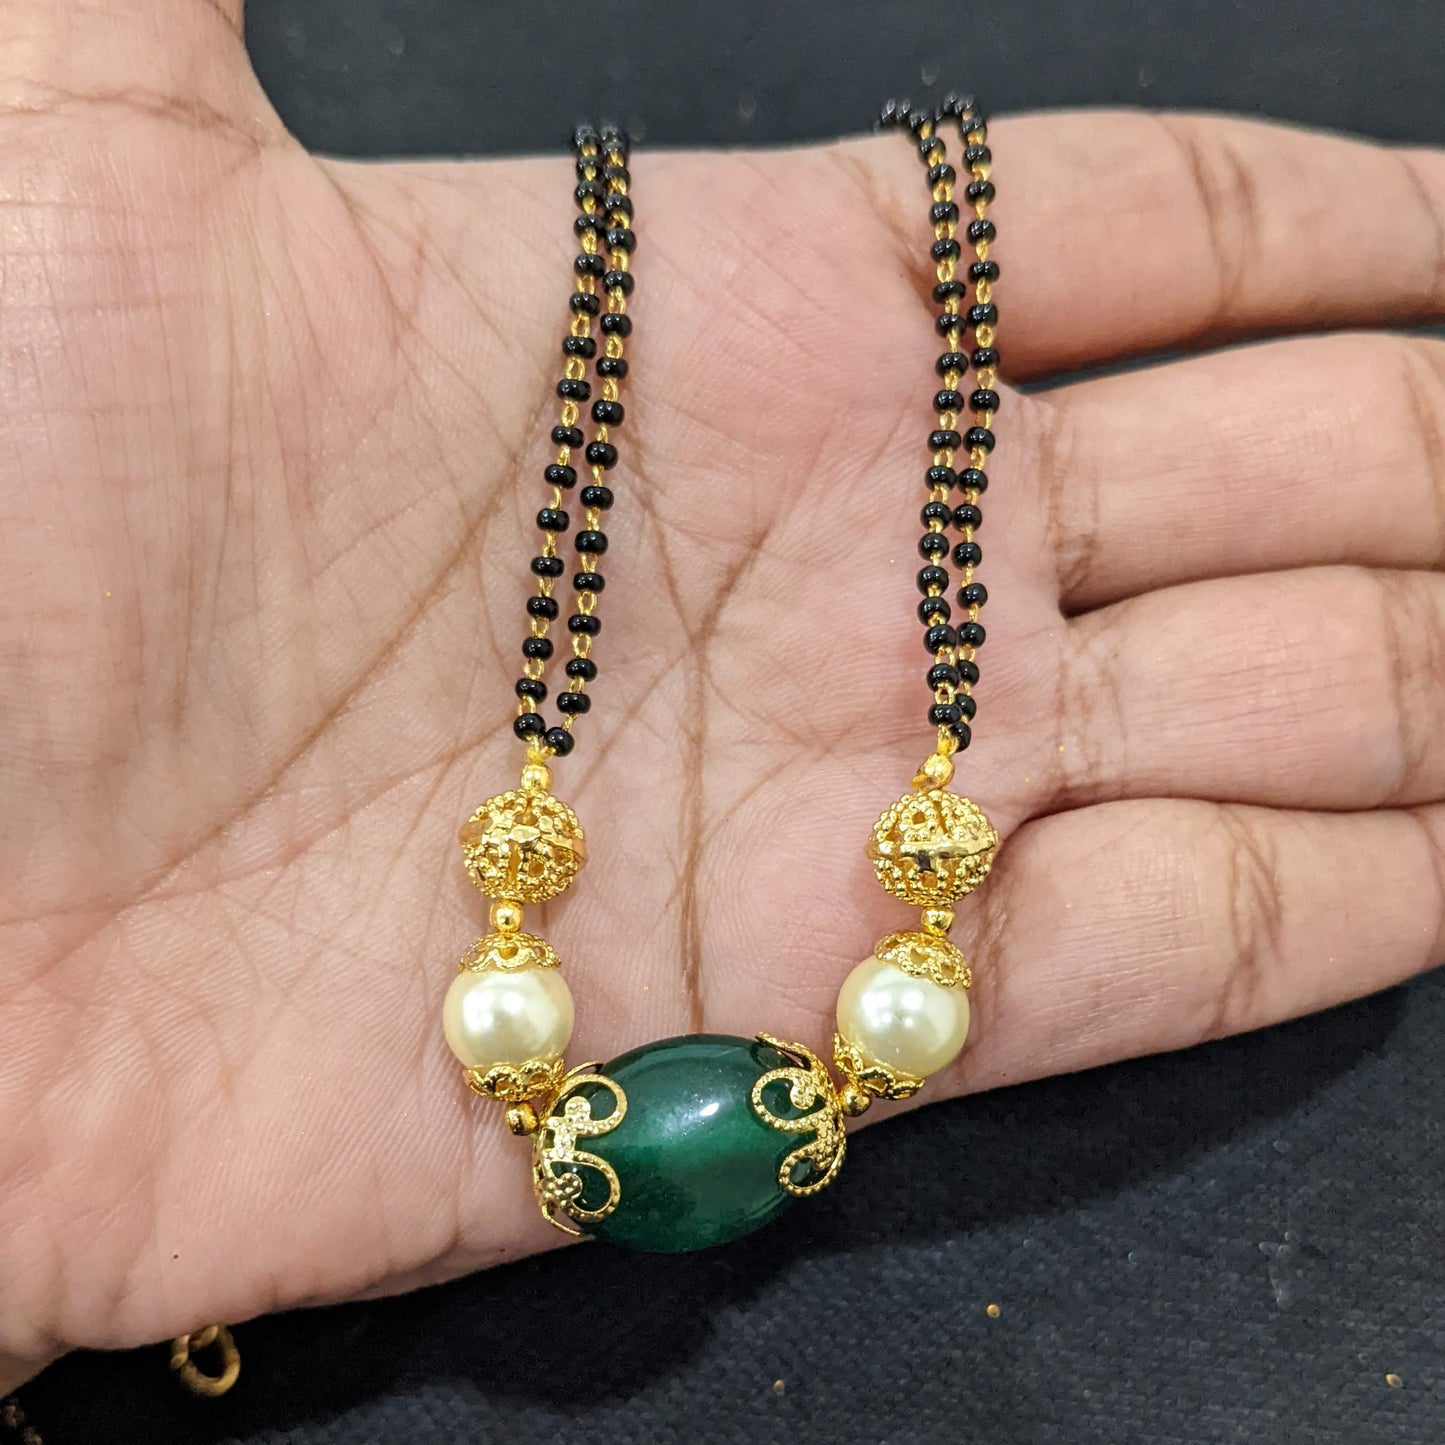 Mangalsutra - Green Pearl bead Pendant Necklace - Double strand